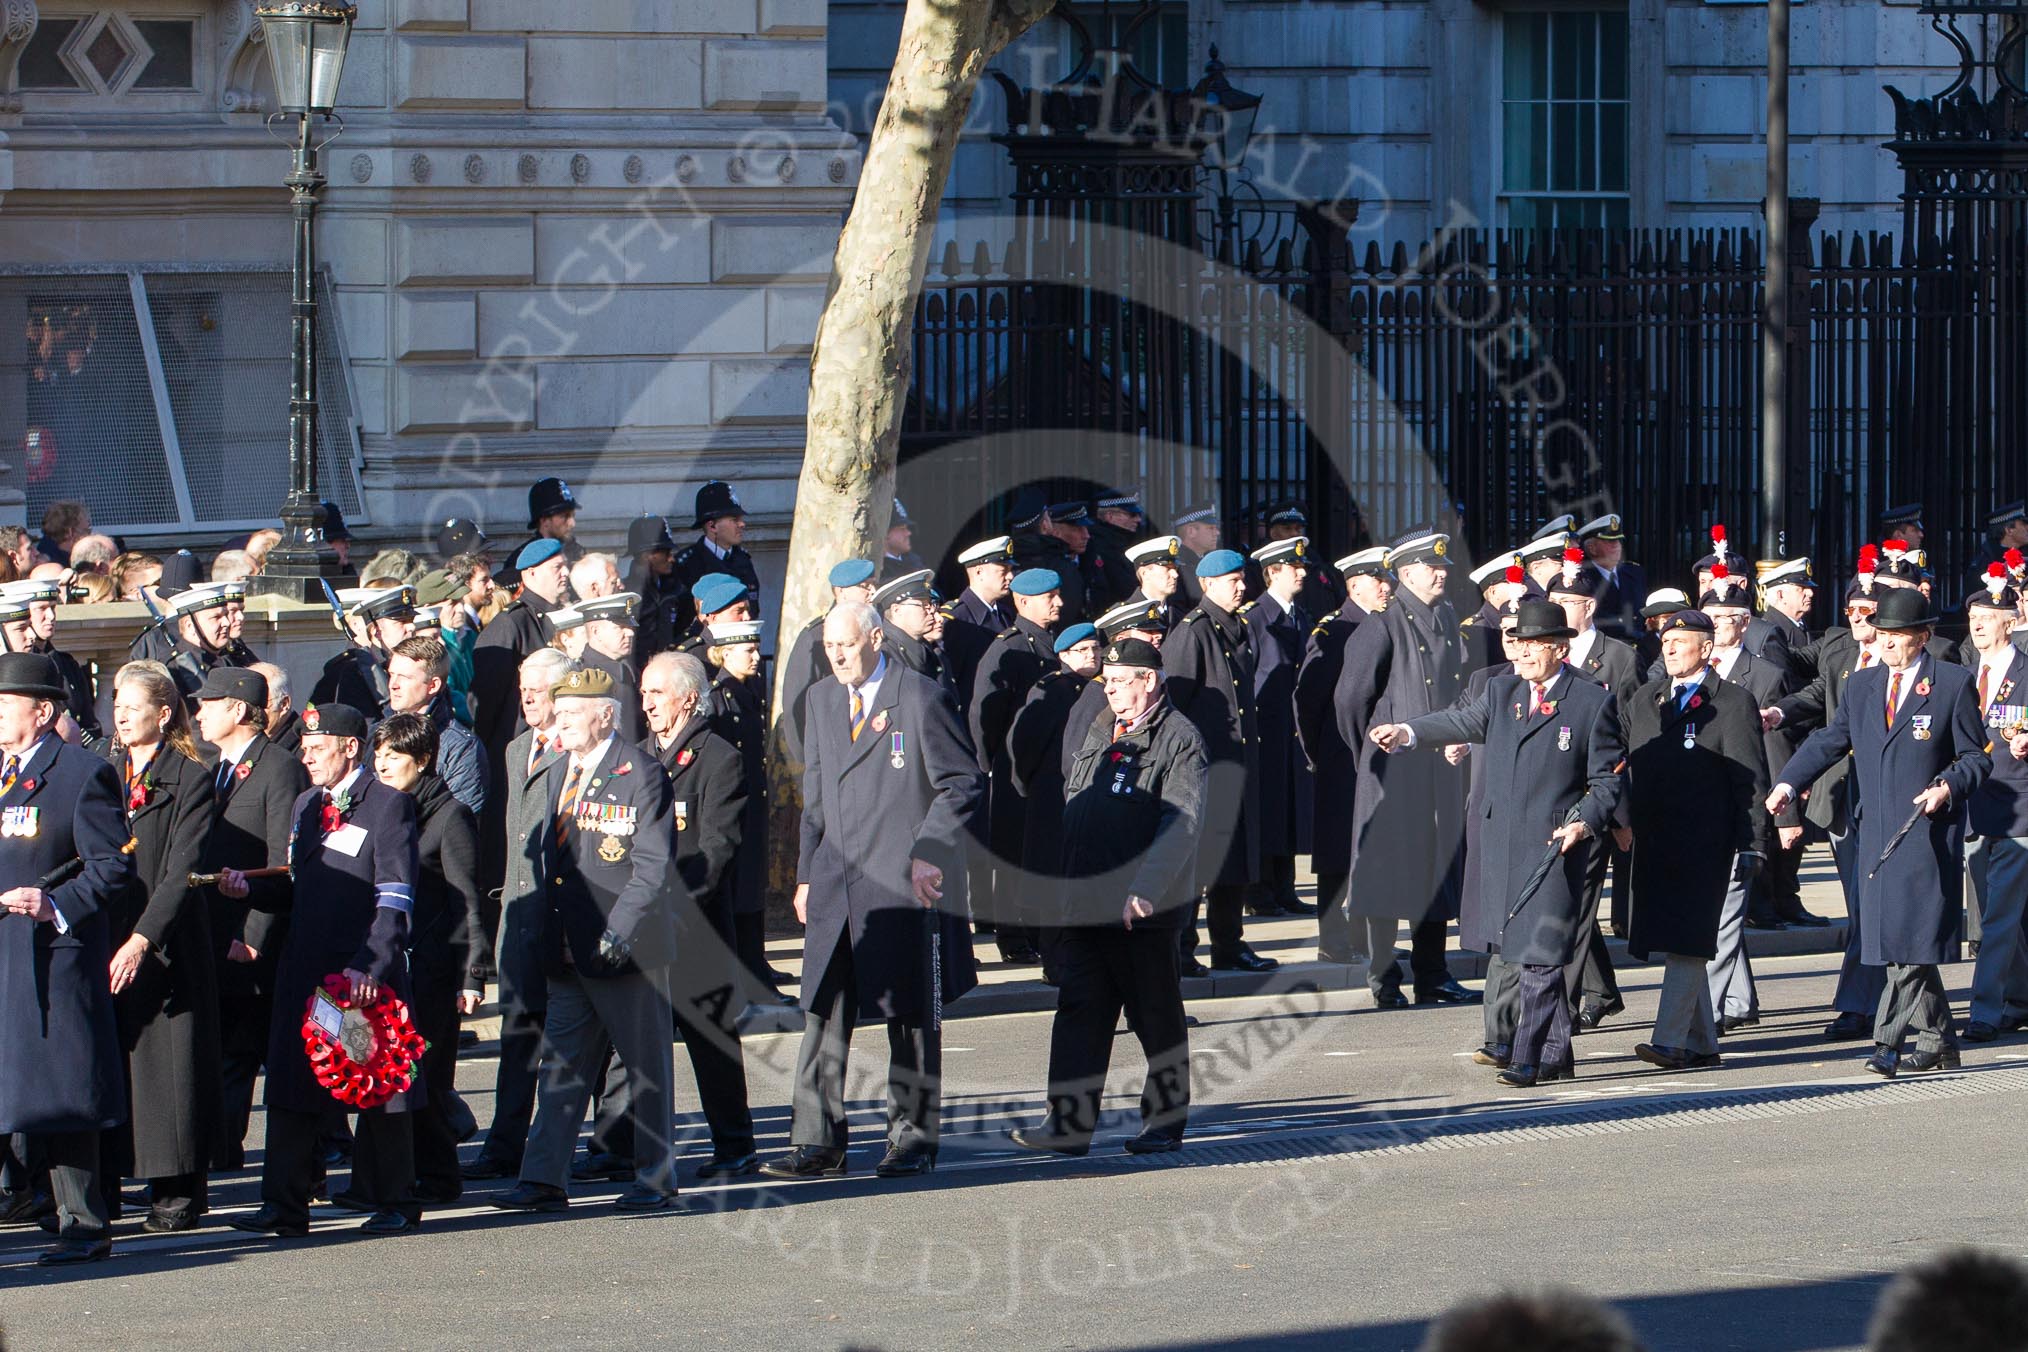 Remembrance Sunday 2012 Cenotaph March Past: Group A4 - Royal Sussex Regimental Association, A5 - Royal Hampshire Regiment Comrades Association, and A6 - Royal Regiment of Fusiliers..
Whitehall, Cenotaph,
London SW1,

United Kingdom,
on 11 November 2012 at 11:48, image #573